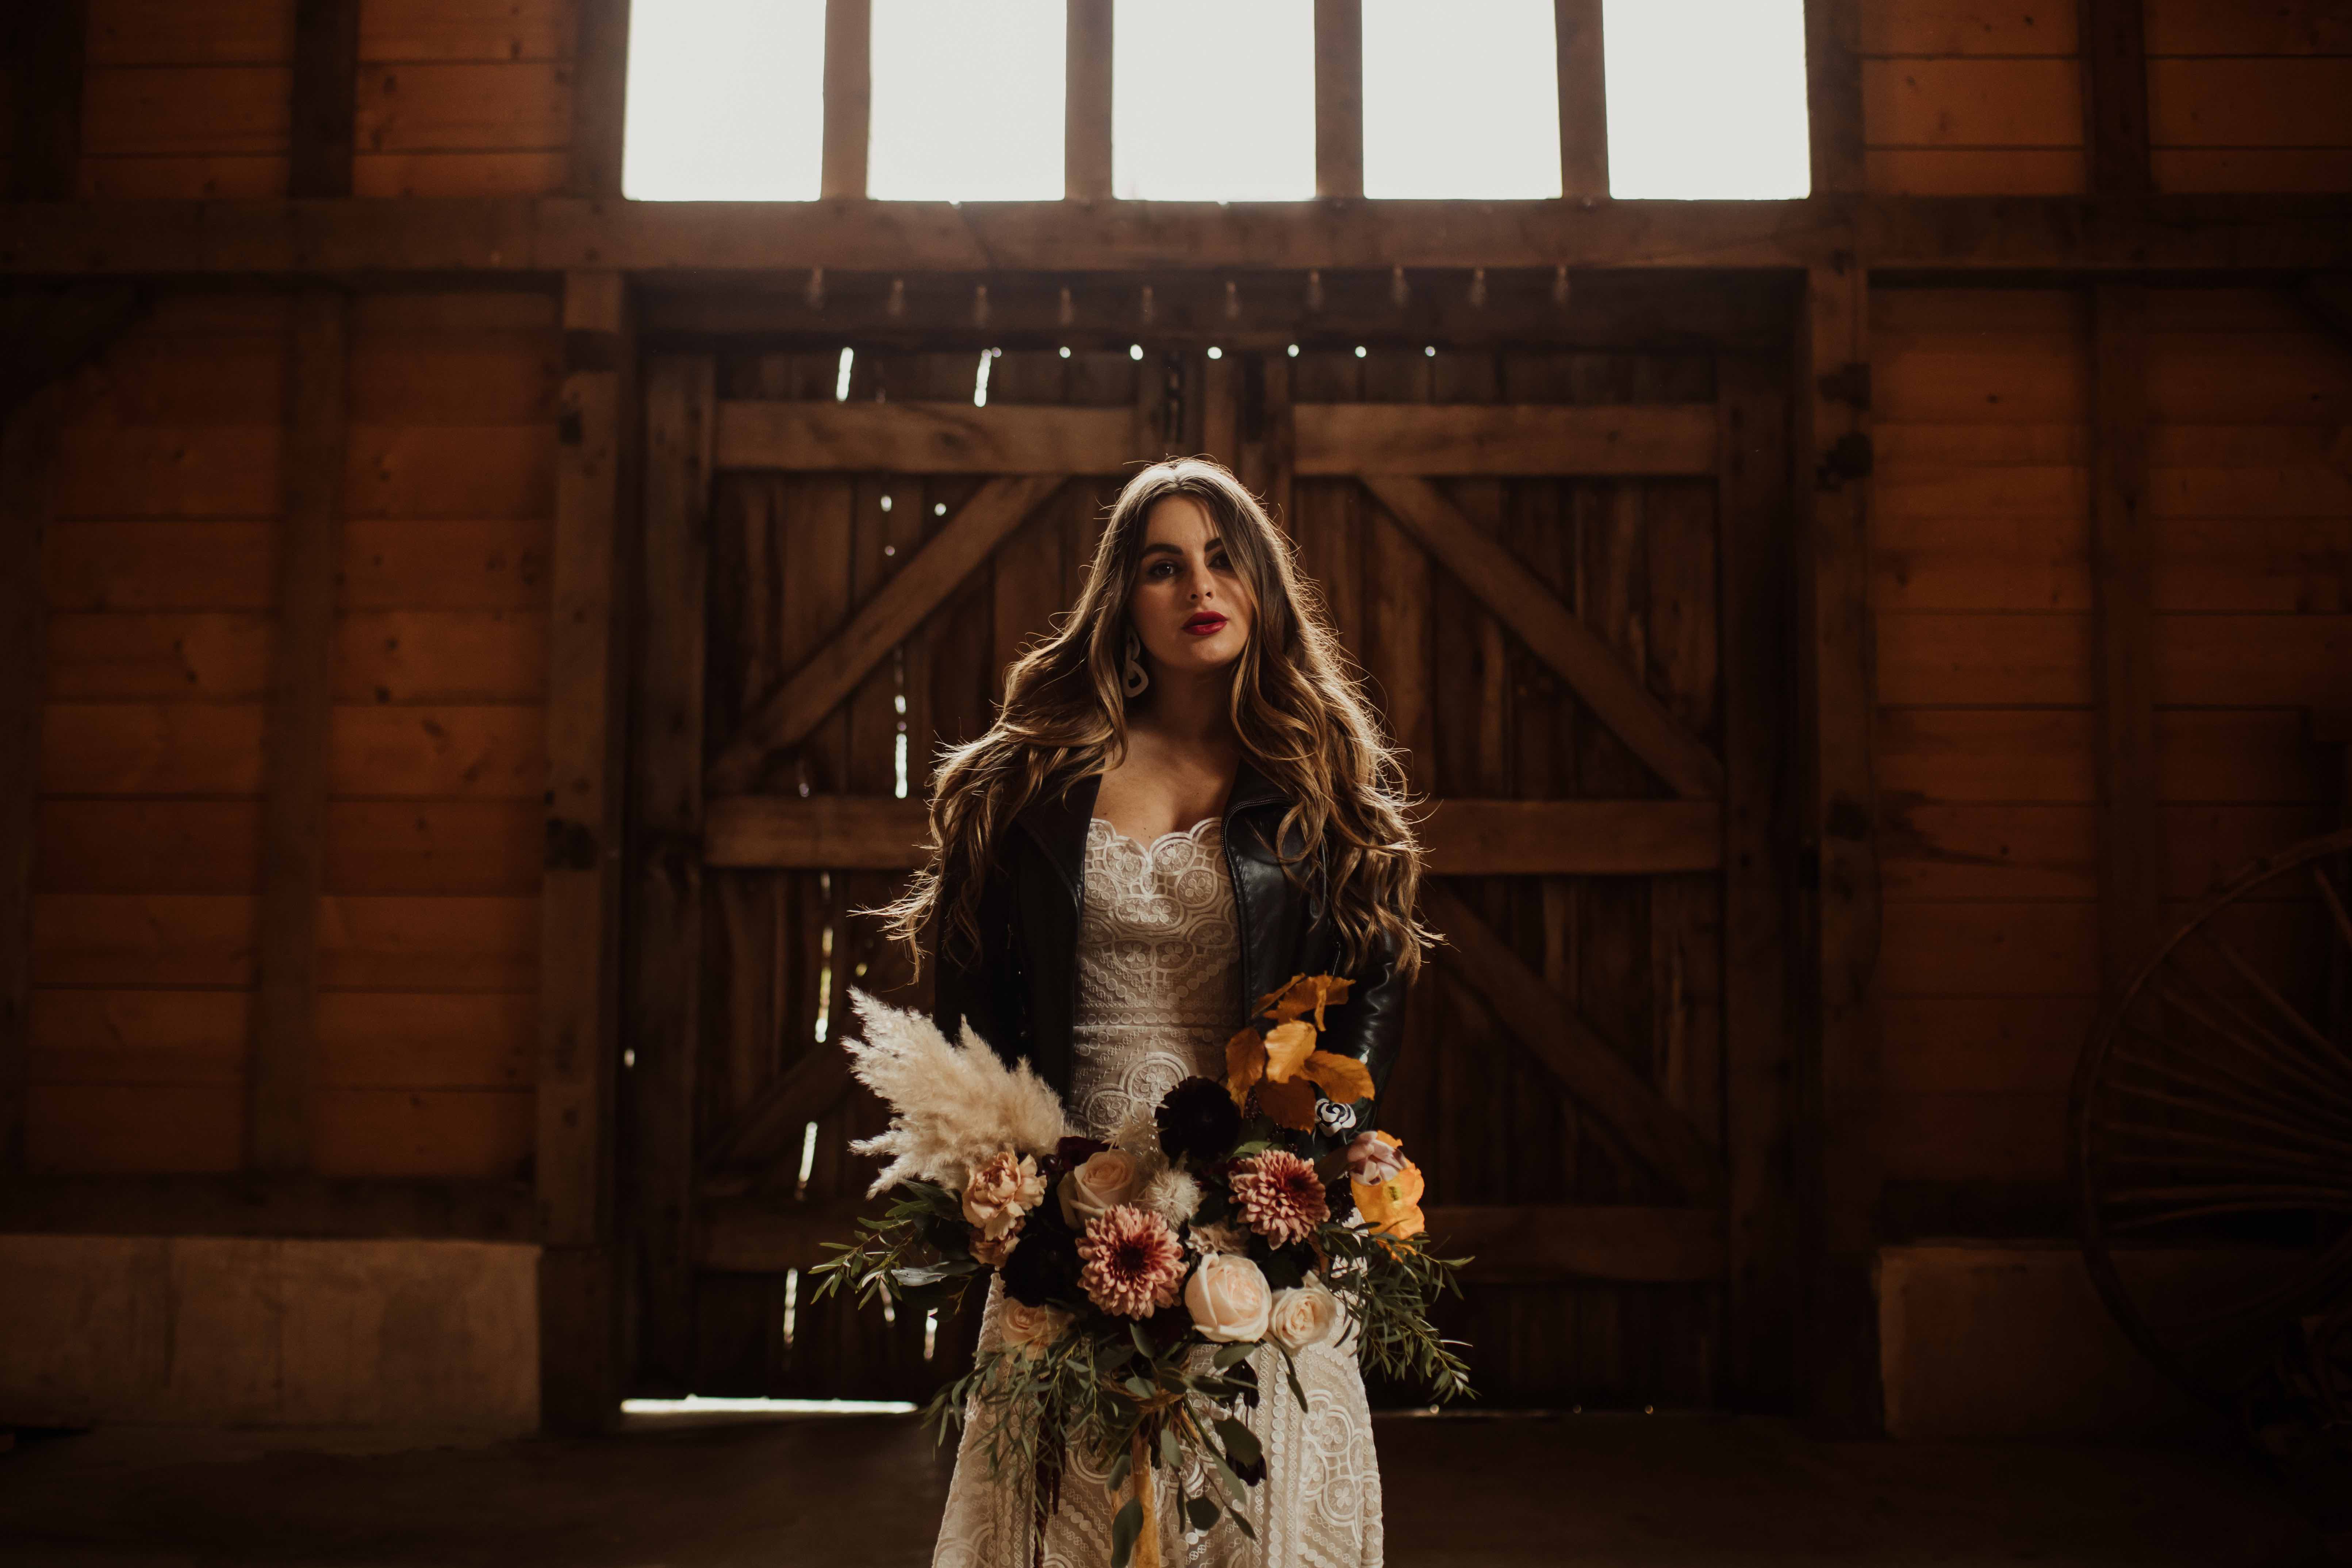 Cool boho bride with long hair and leather jacket | Rustic barn backdrop